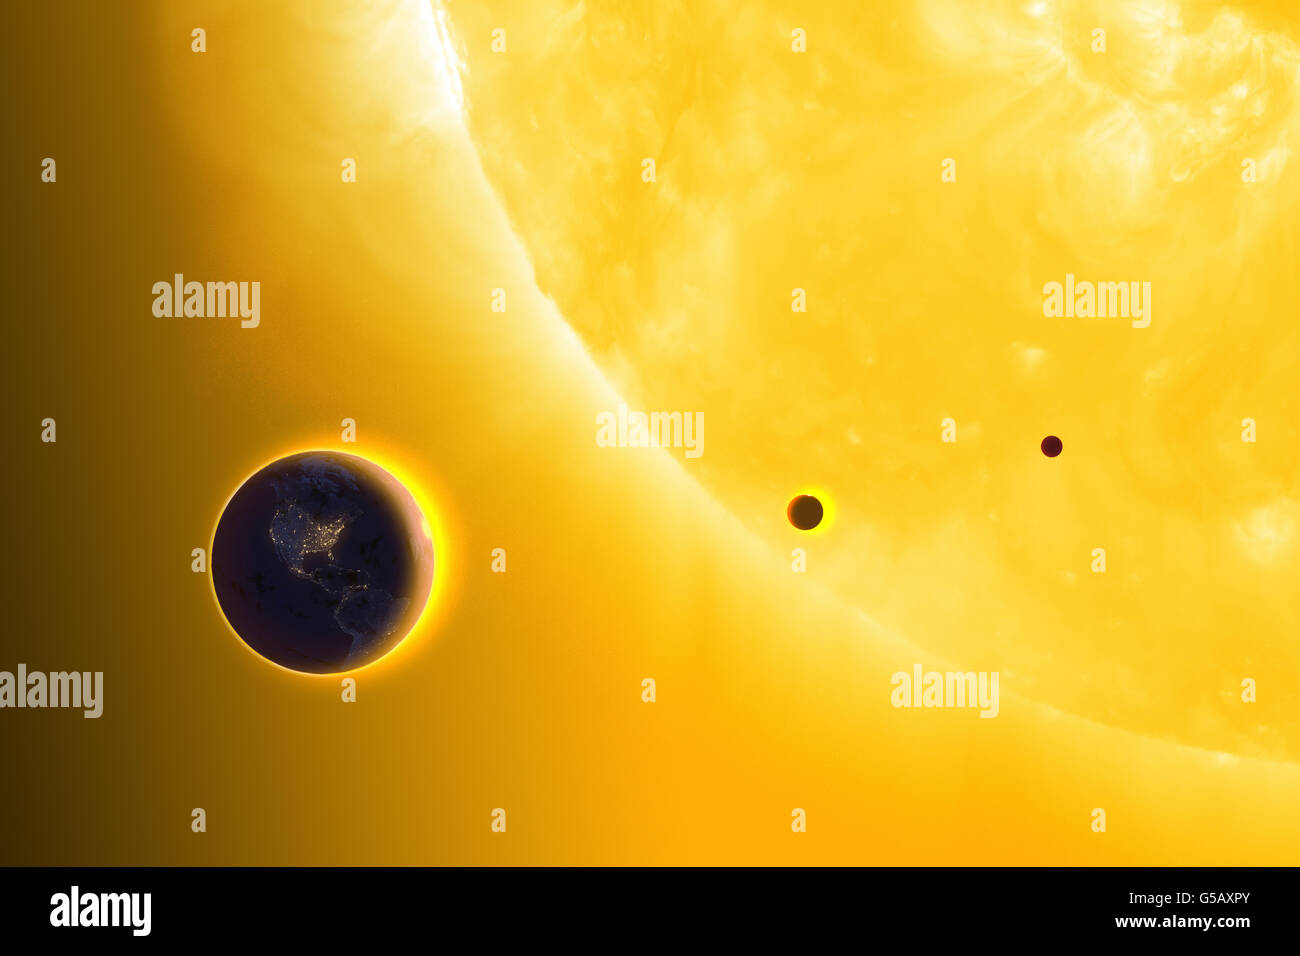 Earth, Venus, Mercury in orbit around the Sun. The suns diameter is about 109 times that of Earth Stock Photo